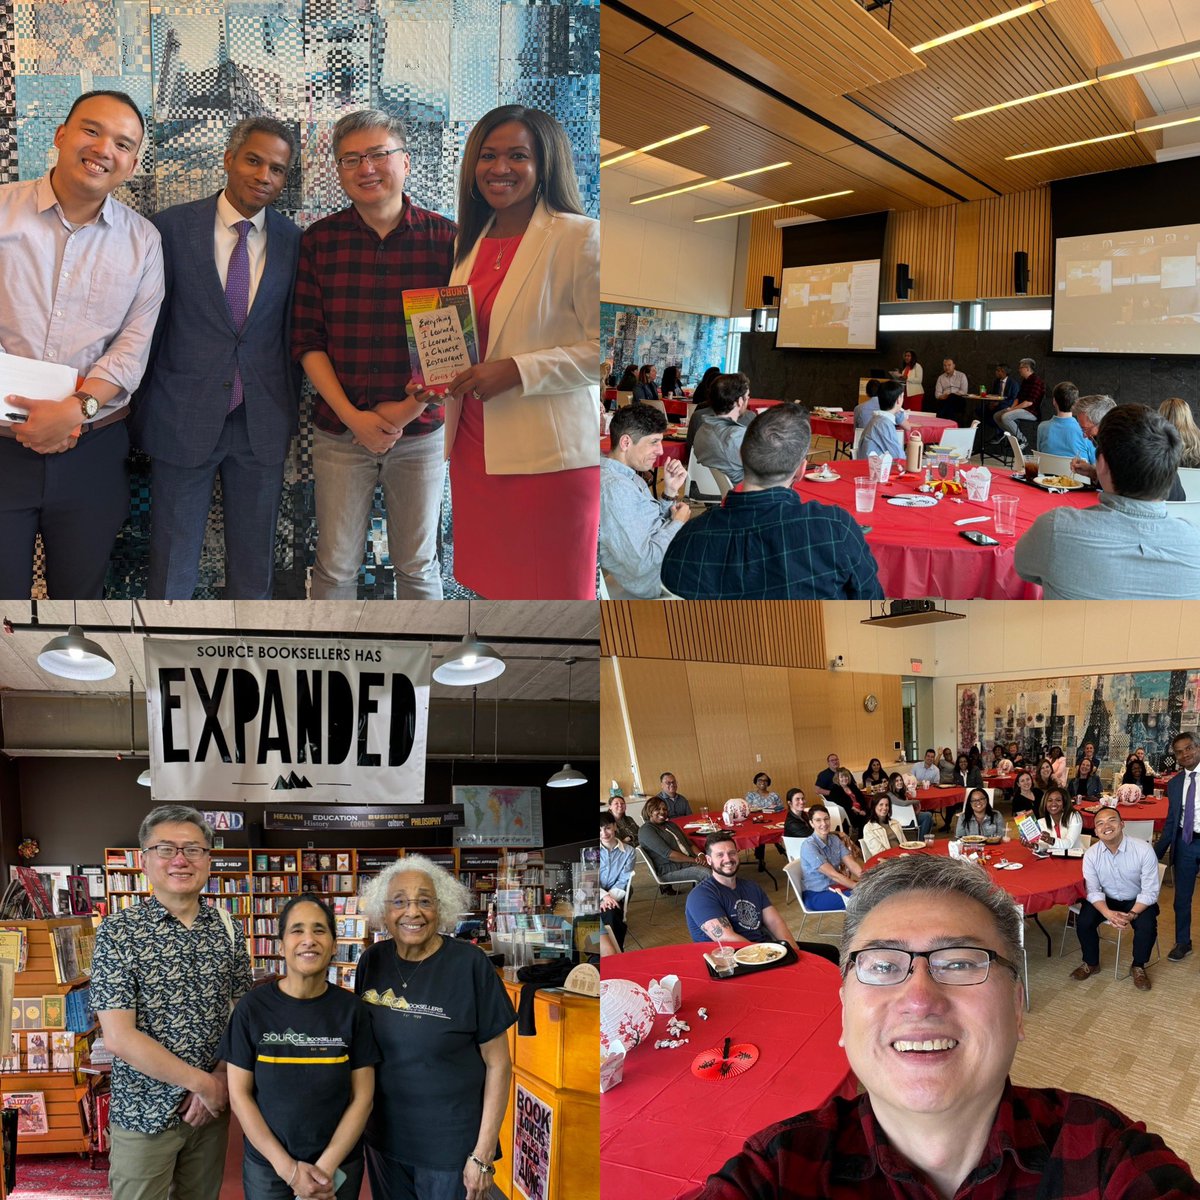 Thnx to @thekresgefoundation for a wonderful afternoon. Keep doing great work in Detroit. Look forward to connecting again soon! @kd_welch , Randal and Jonathan! Thanks @sourcebooksellers for providing the books! @littlebrown